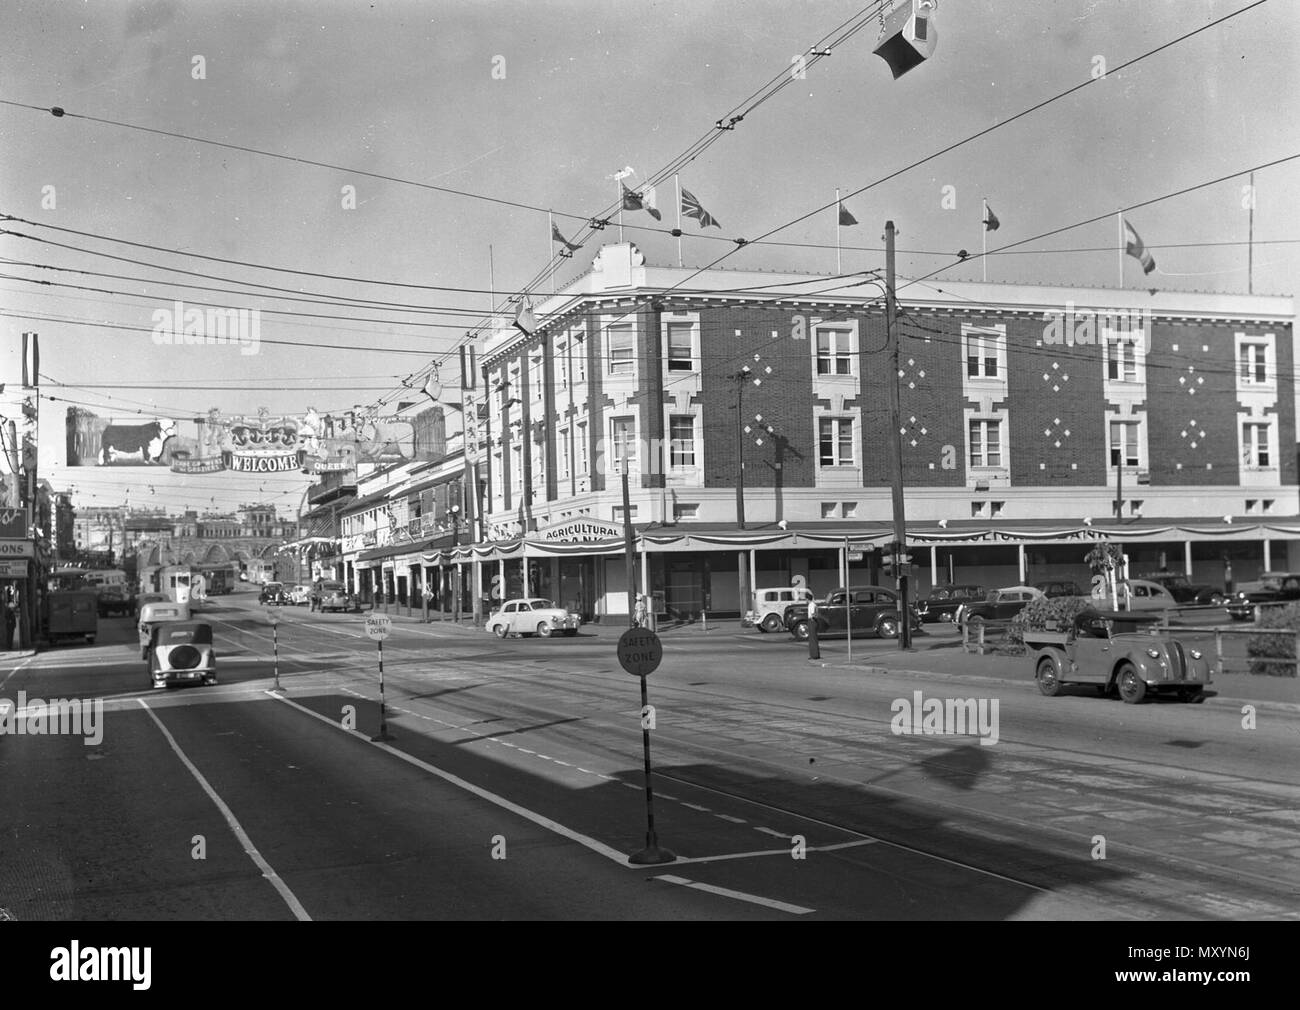 Melbourne Street, South Brisbane, March 1954. Decorated for the 1954 Royal tour. Stock Photo